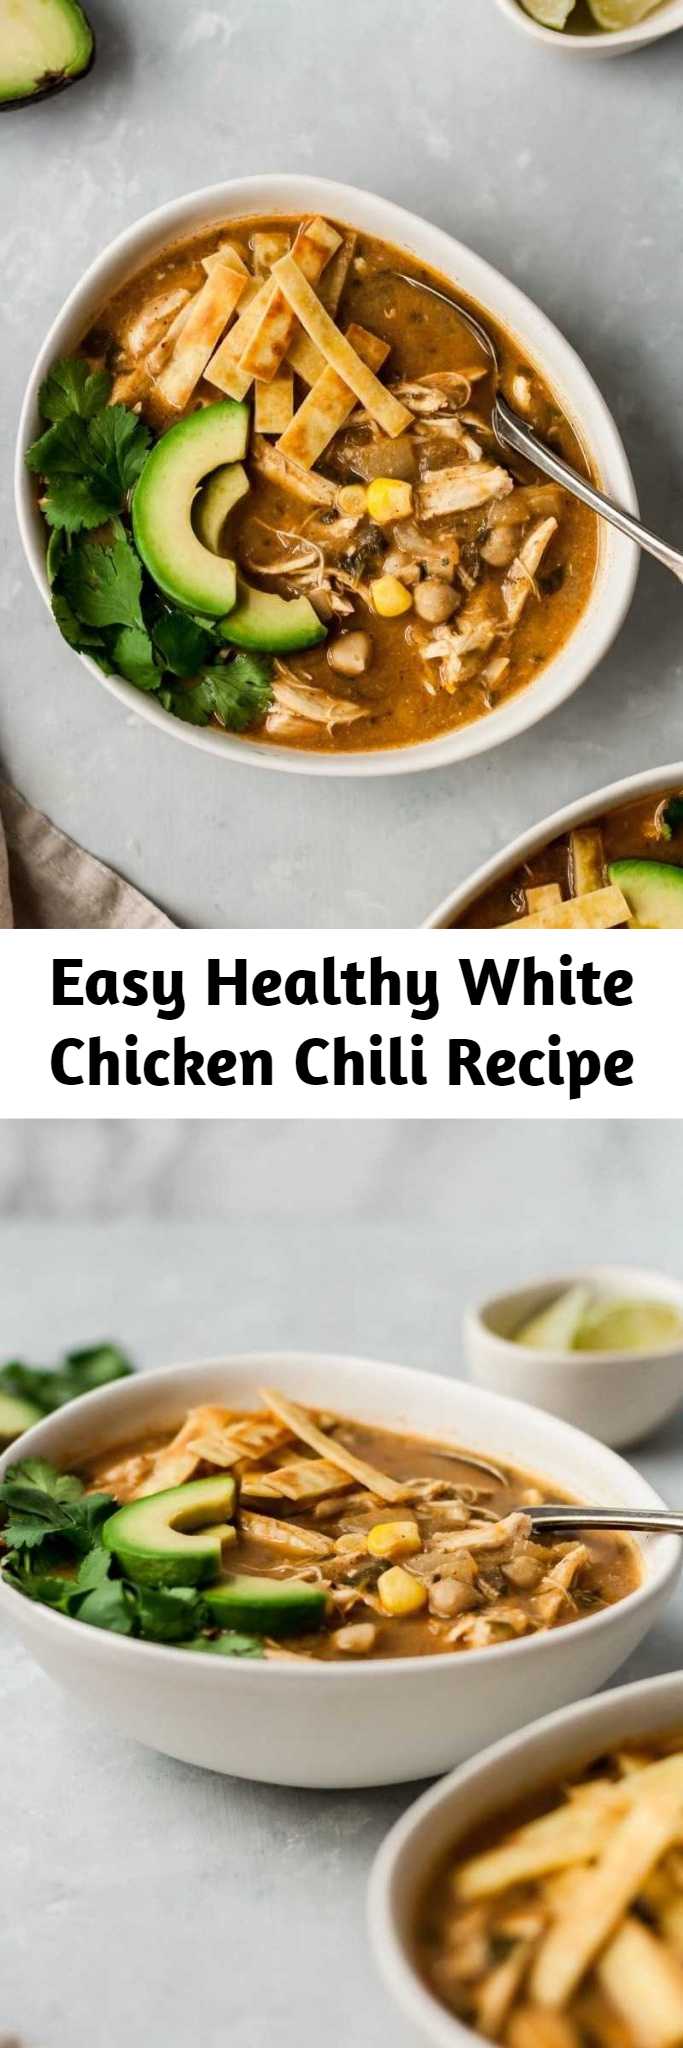 Easy Healthy White Chicken Chili Recipe - Healthy white chicken chili that's nice and creamy, yet there's no cream! Made with green chile, chicken, corn and blended chickpeas to make it thick and creamy. This easy white chicken chili recipe can even be made in the slow cooker and is bound to become a new family favorite. Serve with avocado, tortilla chips and cilantro.